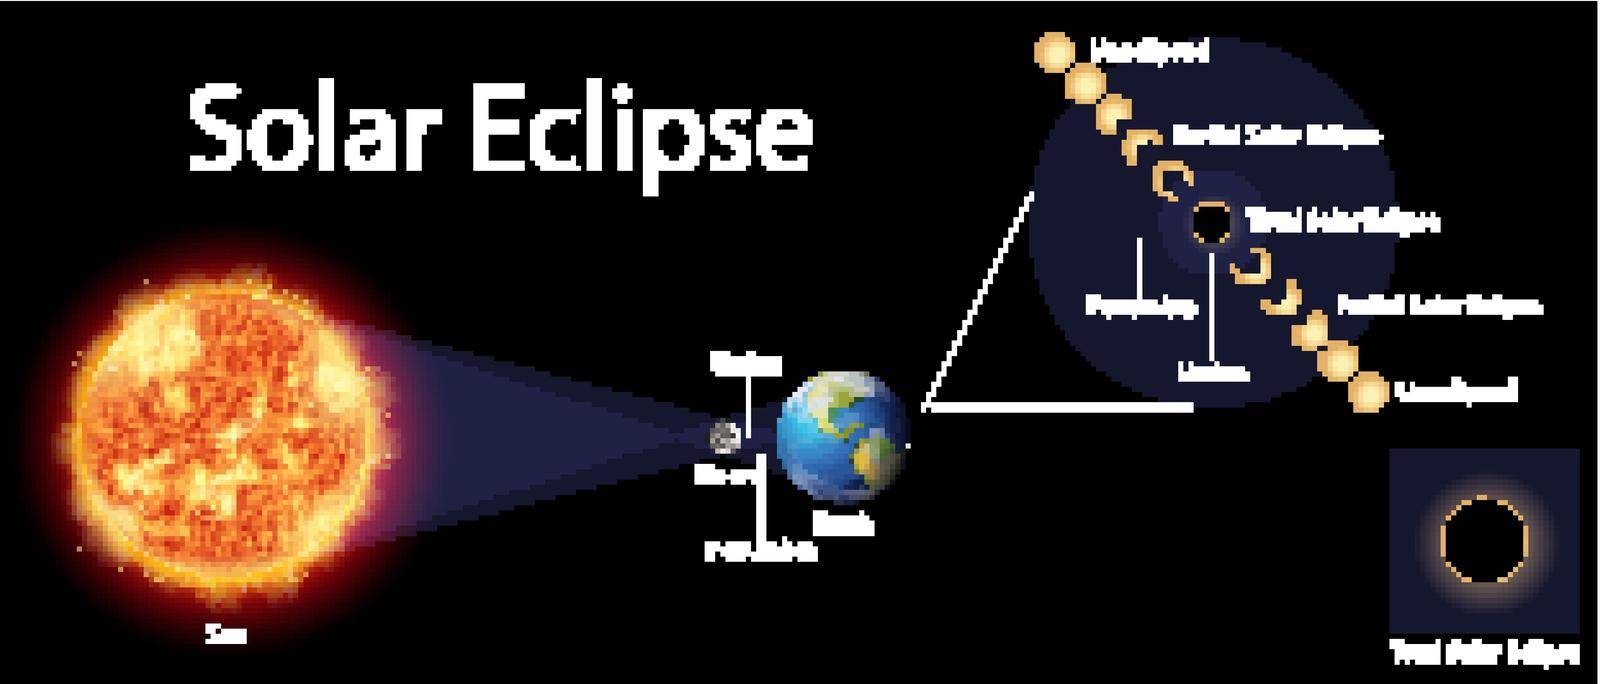 Diagram showing solar eclipse on earth illustration